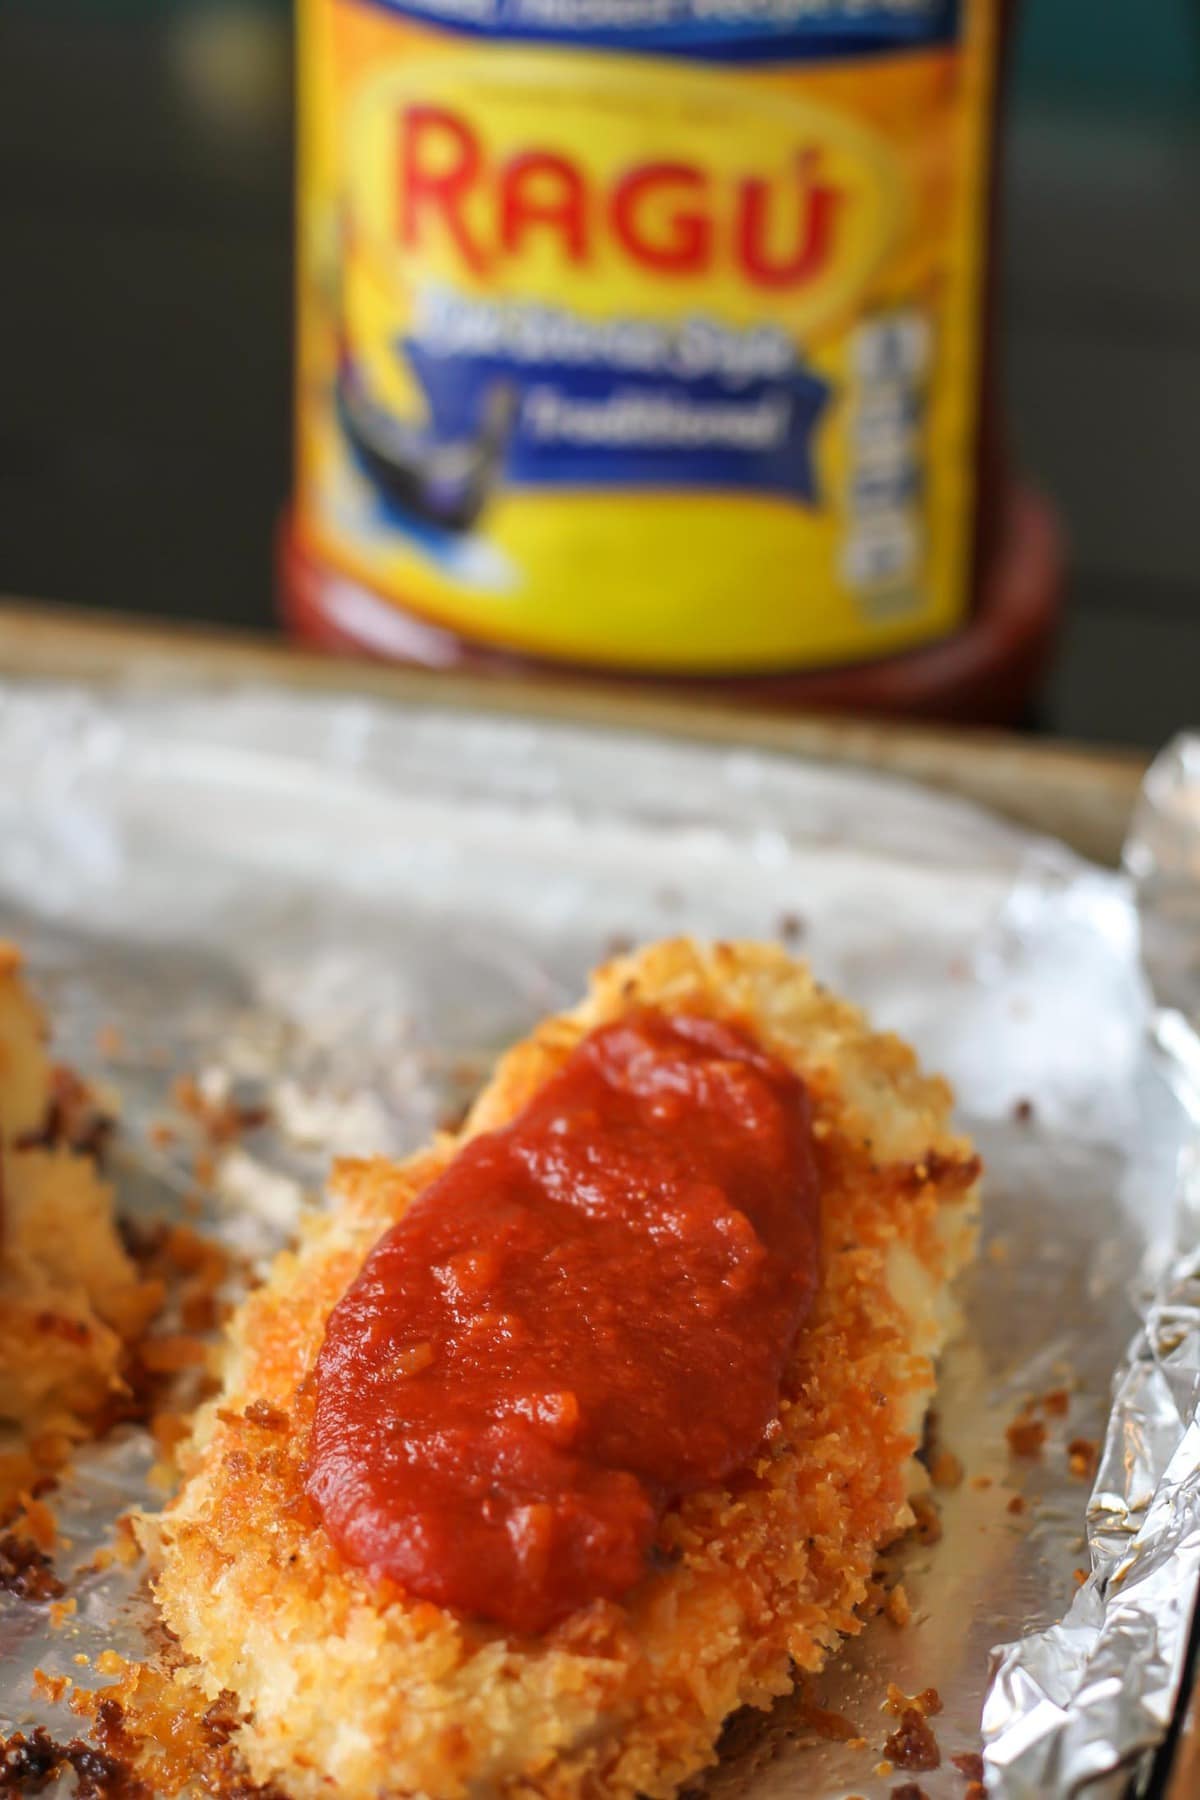 Baked Chicken Parmesan topped with Ragú sauce